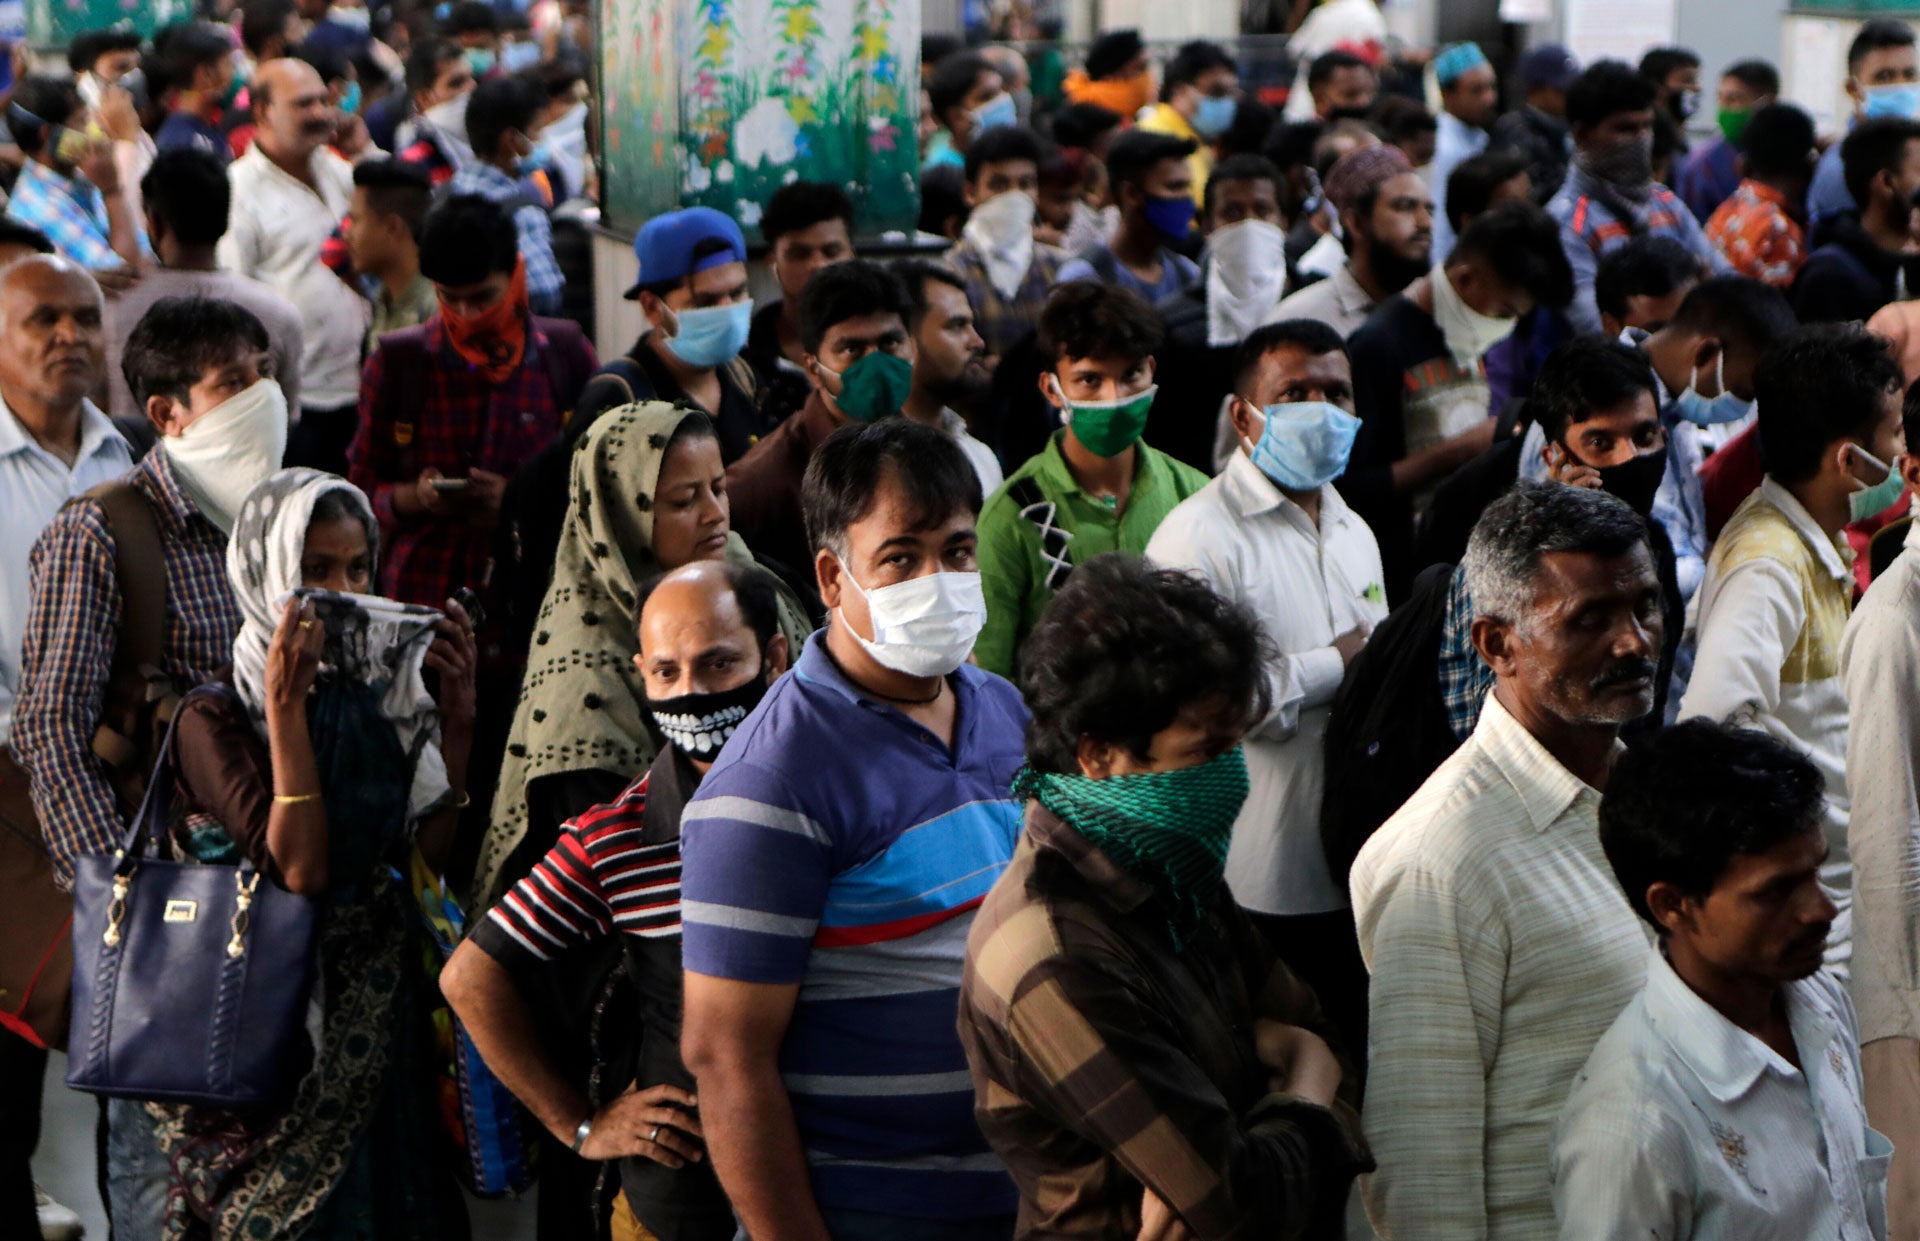 Indians, some wearing protective masks as a precaution against COVID-19, wait to buy train tickets at Chhatrapati Shivaji Terminus in Mumbai, India, March 20, 2020.